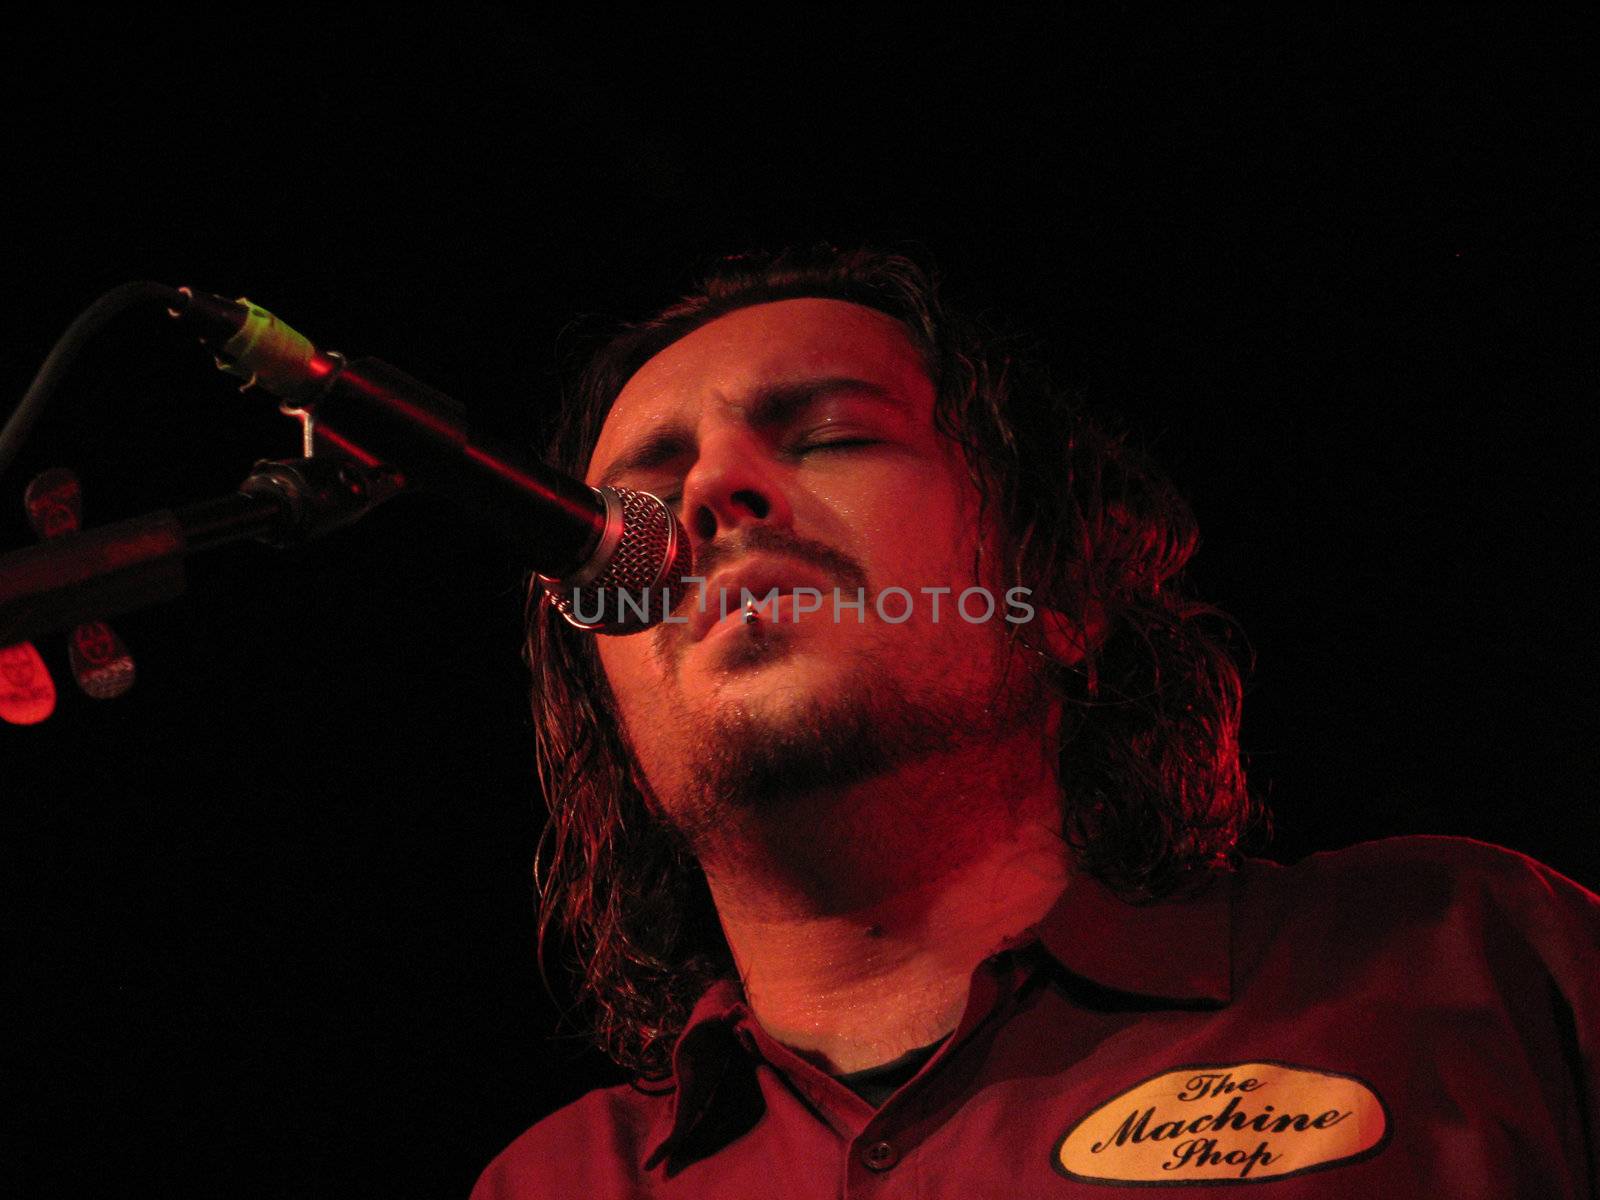 shaun morgan of seether playing in england